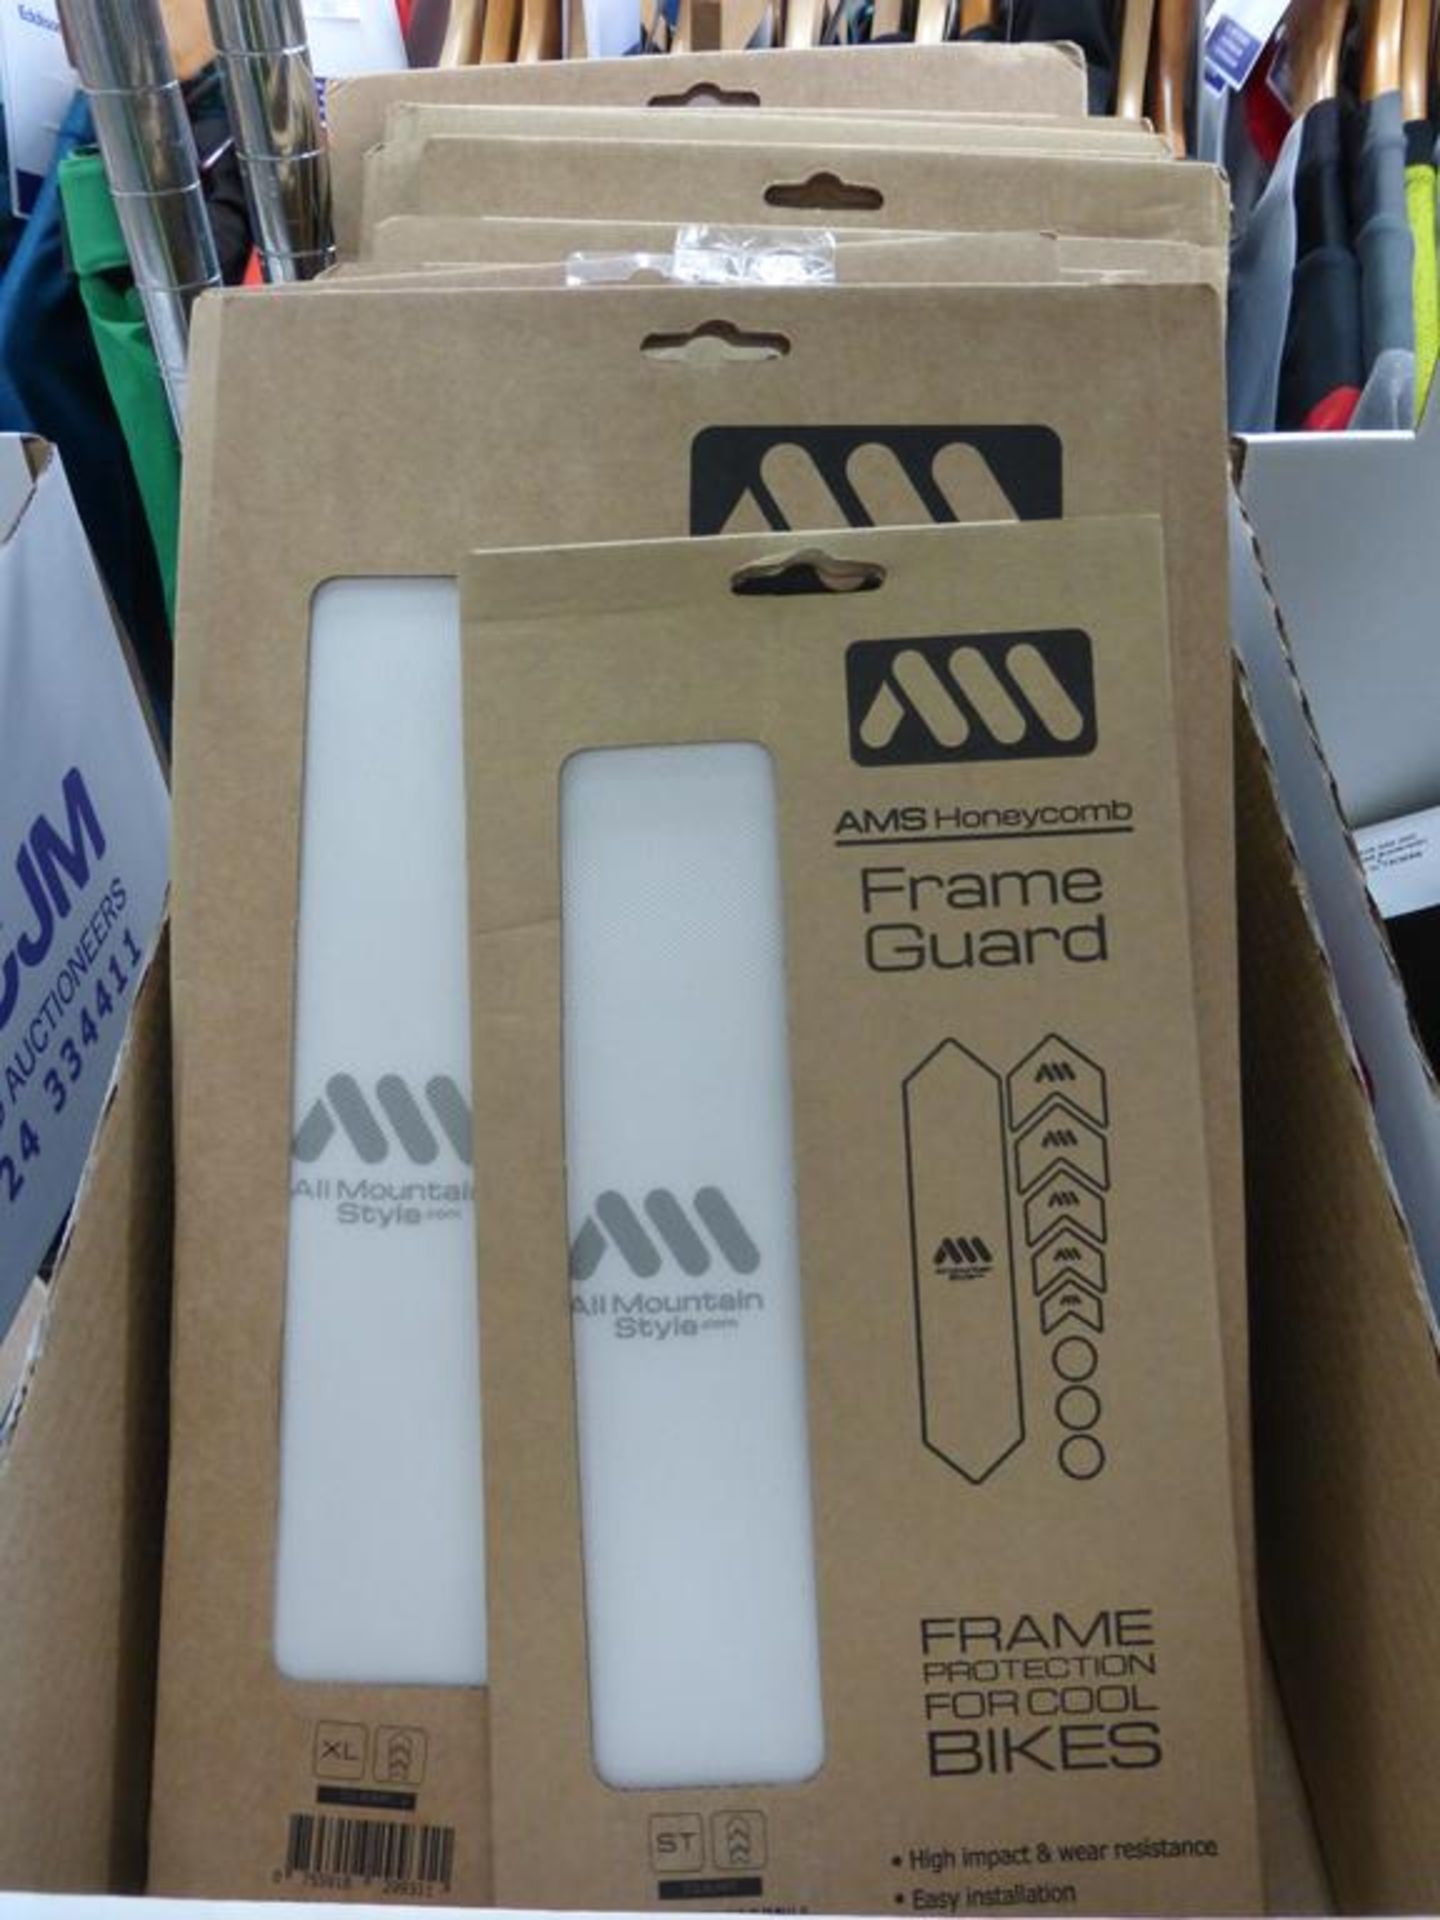 Box of AMS Honeycomb Frame Guards